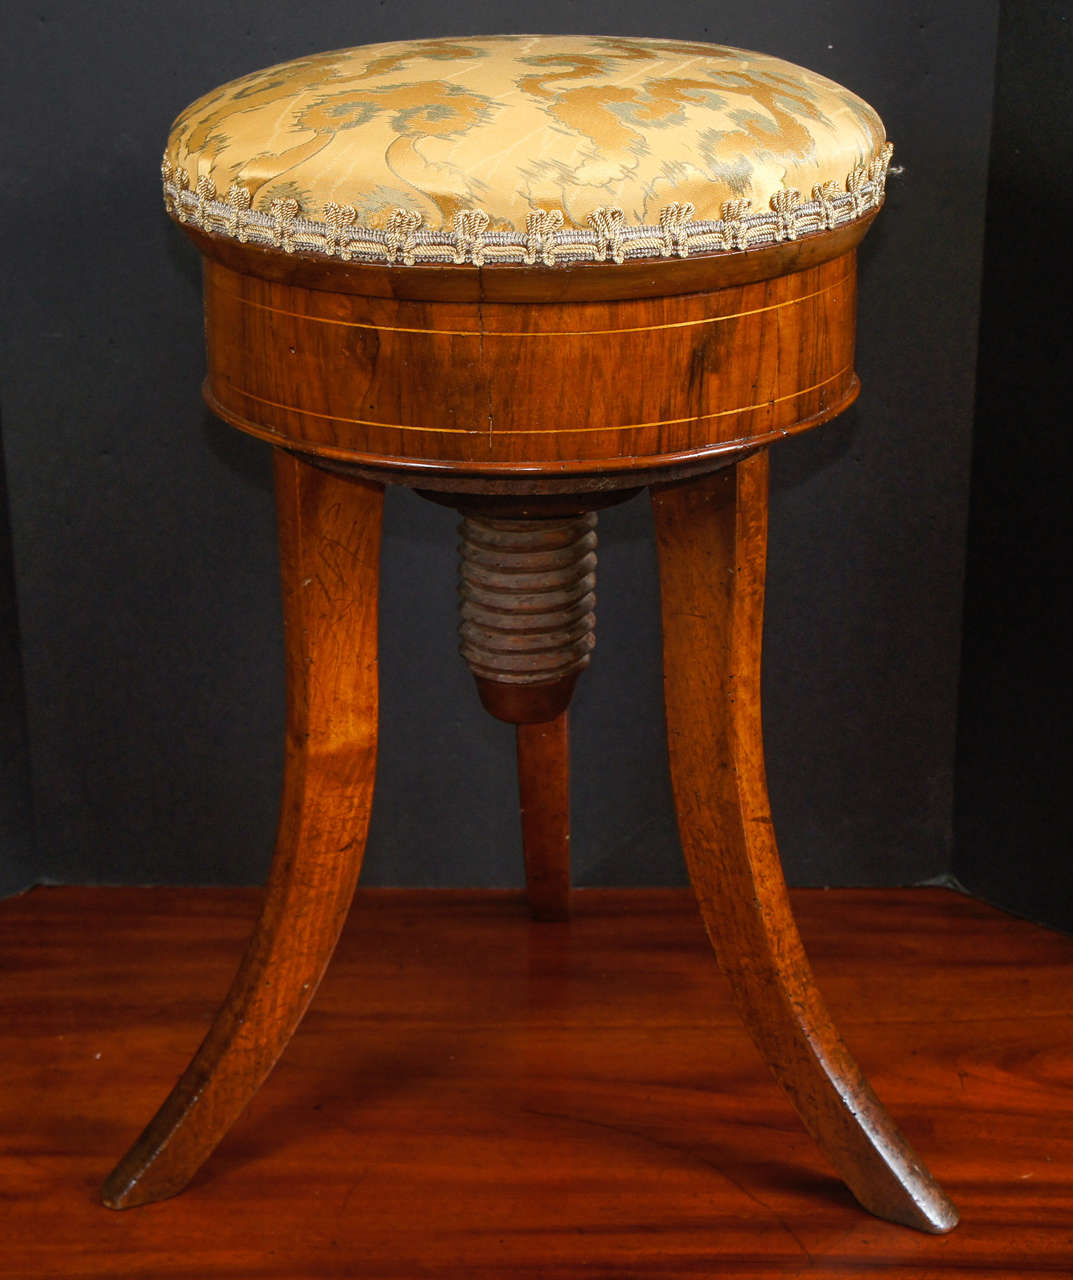 This lovely stool made of fruitwood and walnut circa 1820s was designed as a piano stool with adjustable heights possible by means of the large carved wood screw drive built into the base but can be used as a regular stool for additional seating in